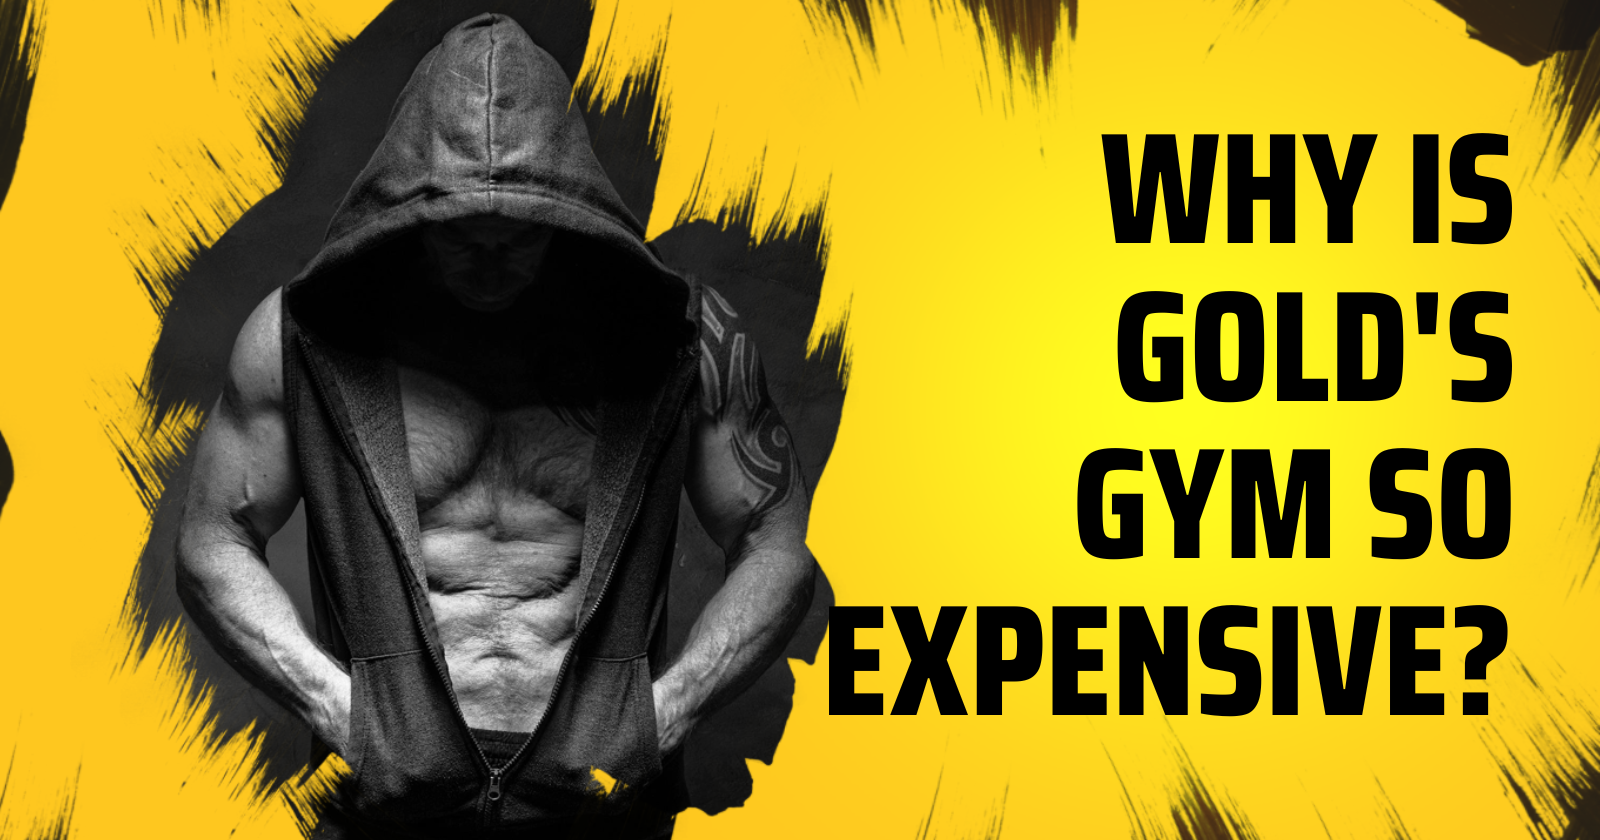 Why Is Gold's Gym So Expensive